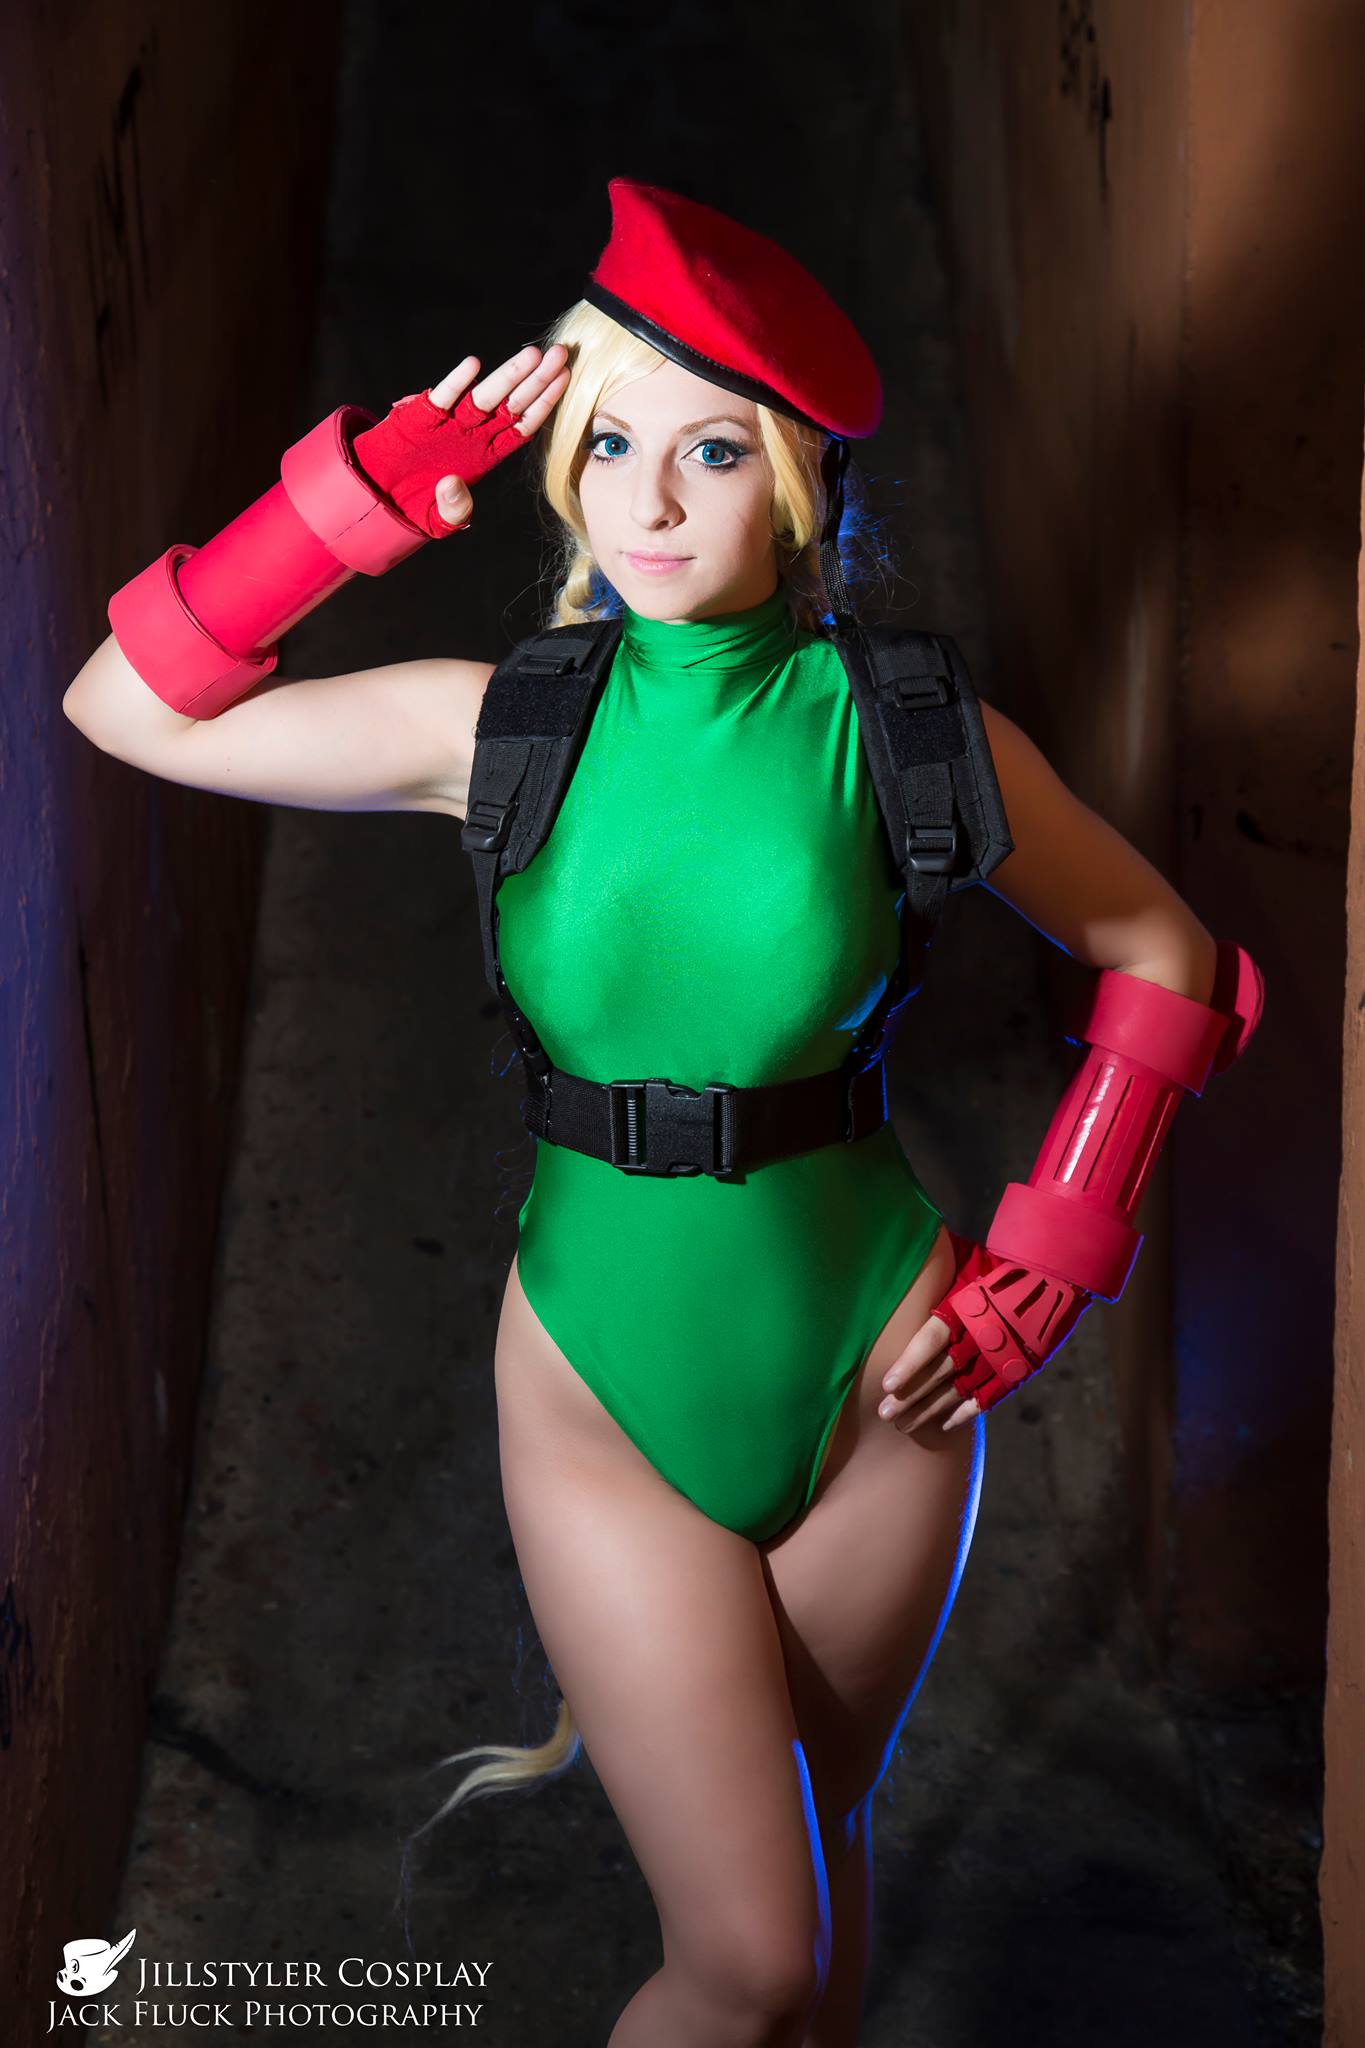 mago Amasar canal Street Fighter on Twitter: "Cammy cosplay by @JillStyler!  https://t.co/pq9ecggGk6" / Twitter